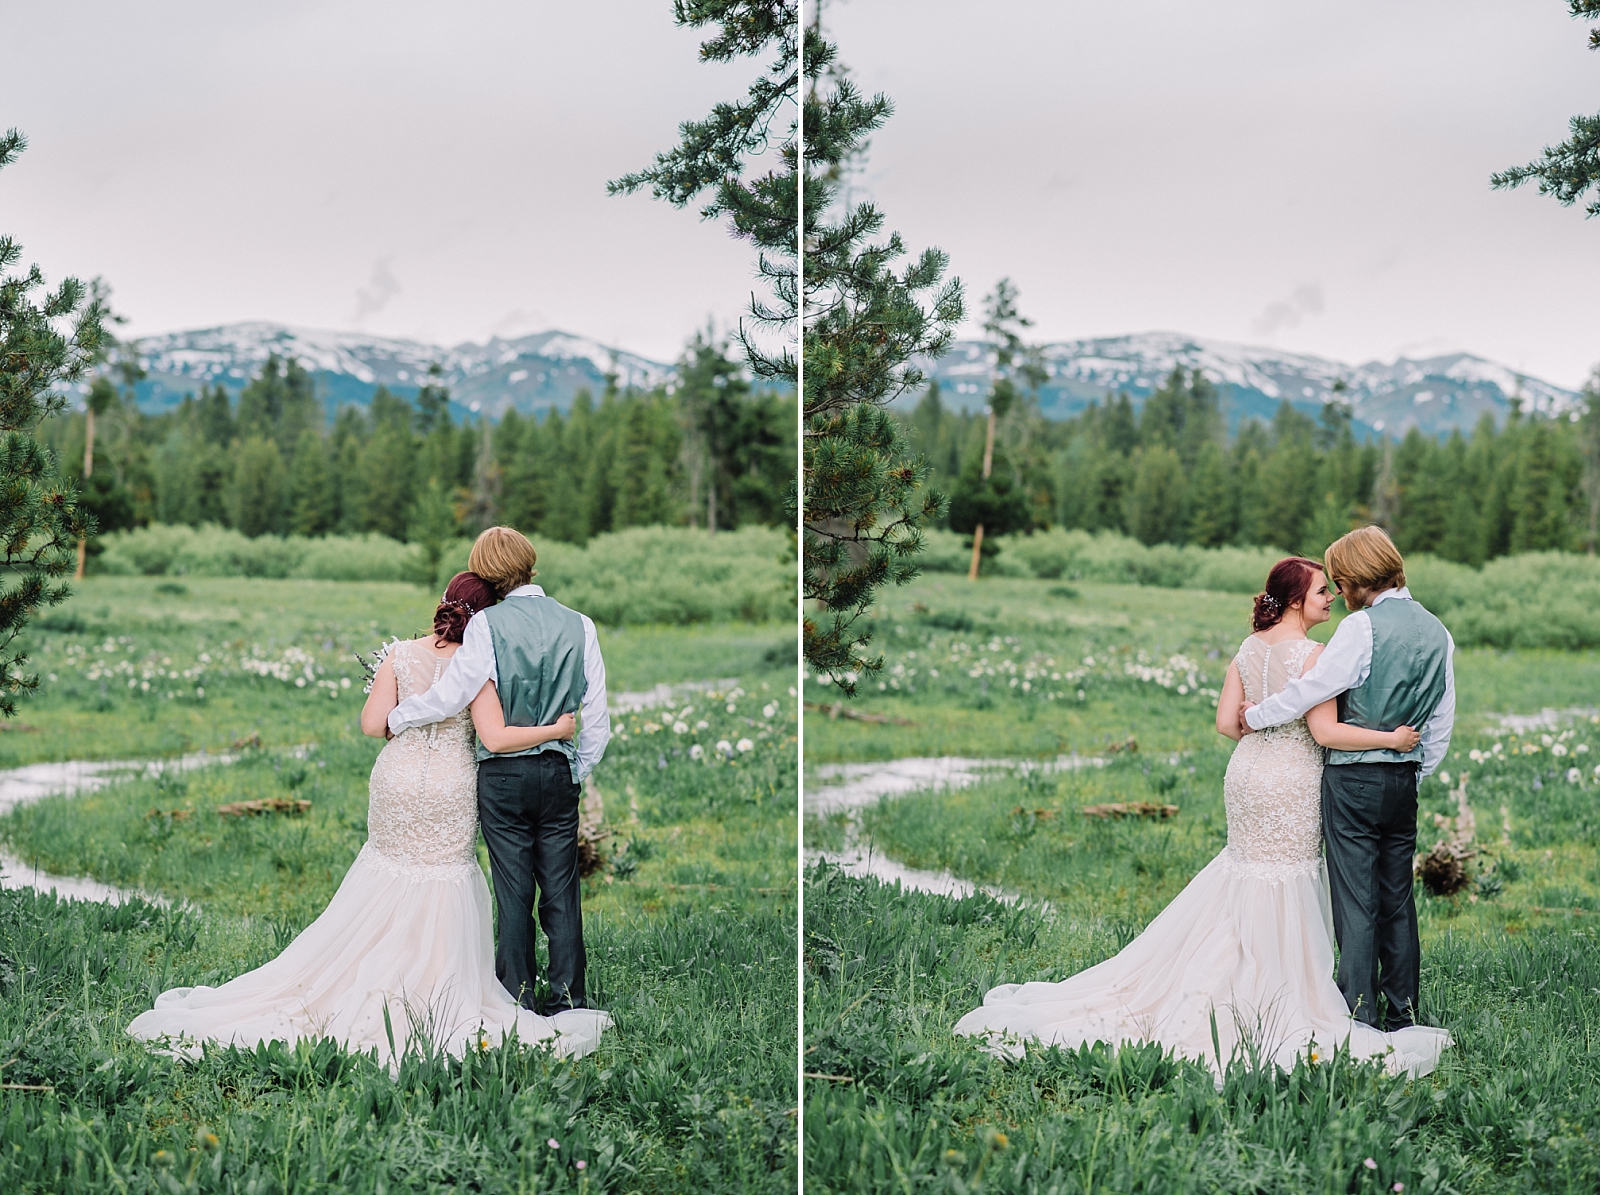 meadow in the mountain with bride and groom idaho wedding